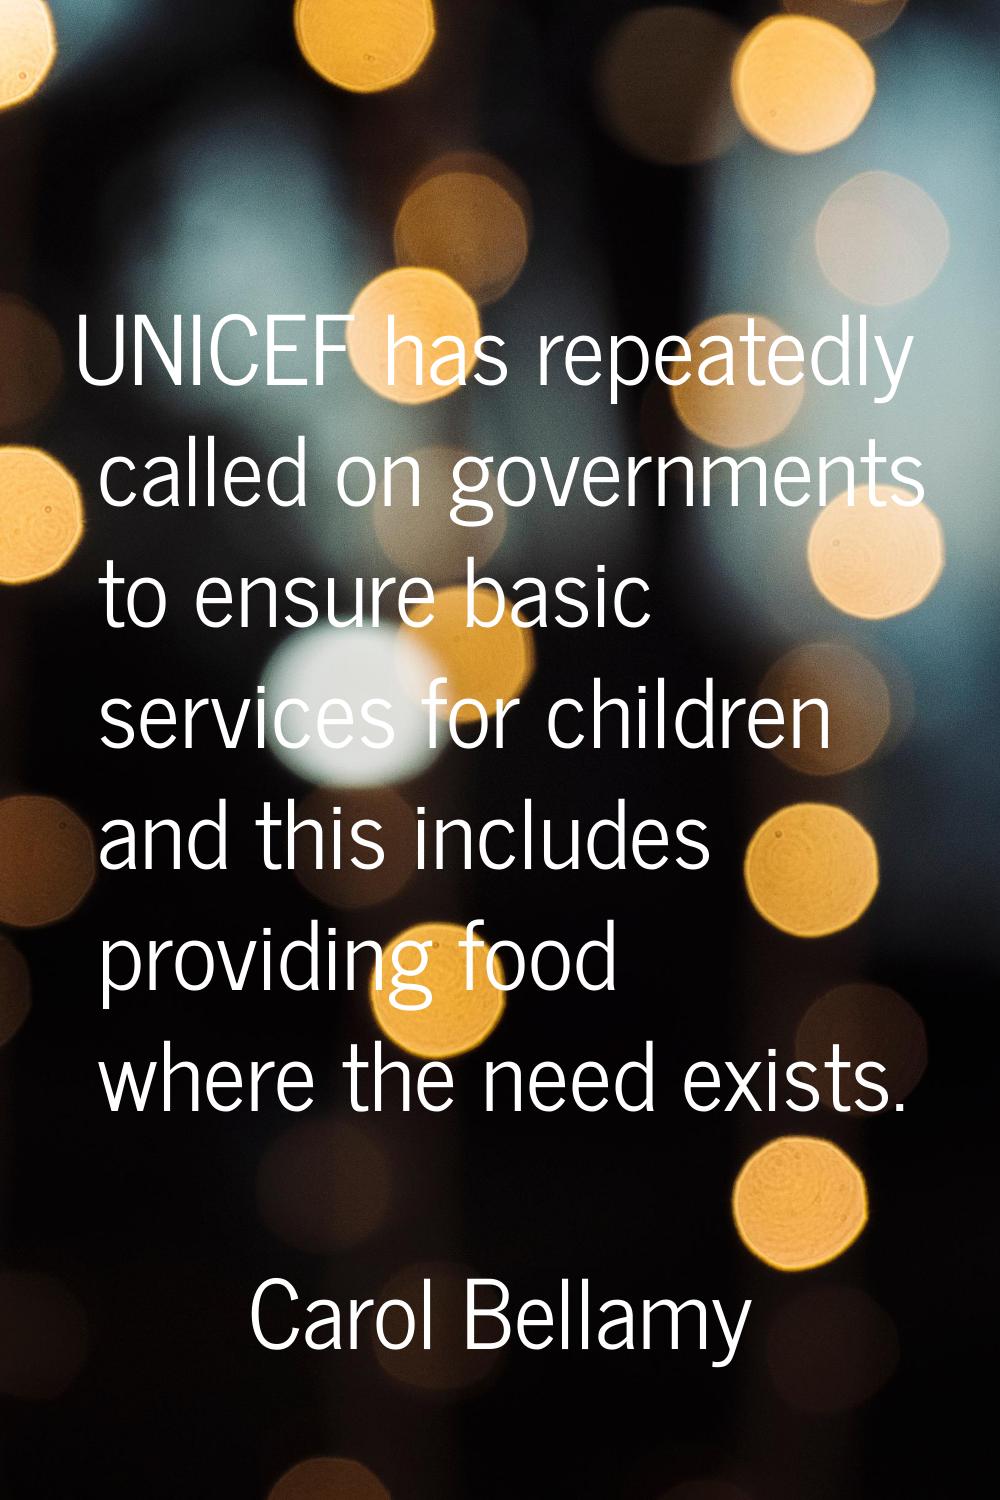 UNICEF has repeatedly called on governments to ensure basic services for children and this includes